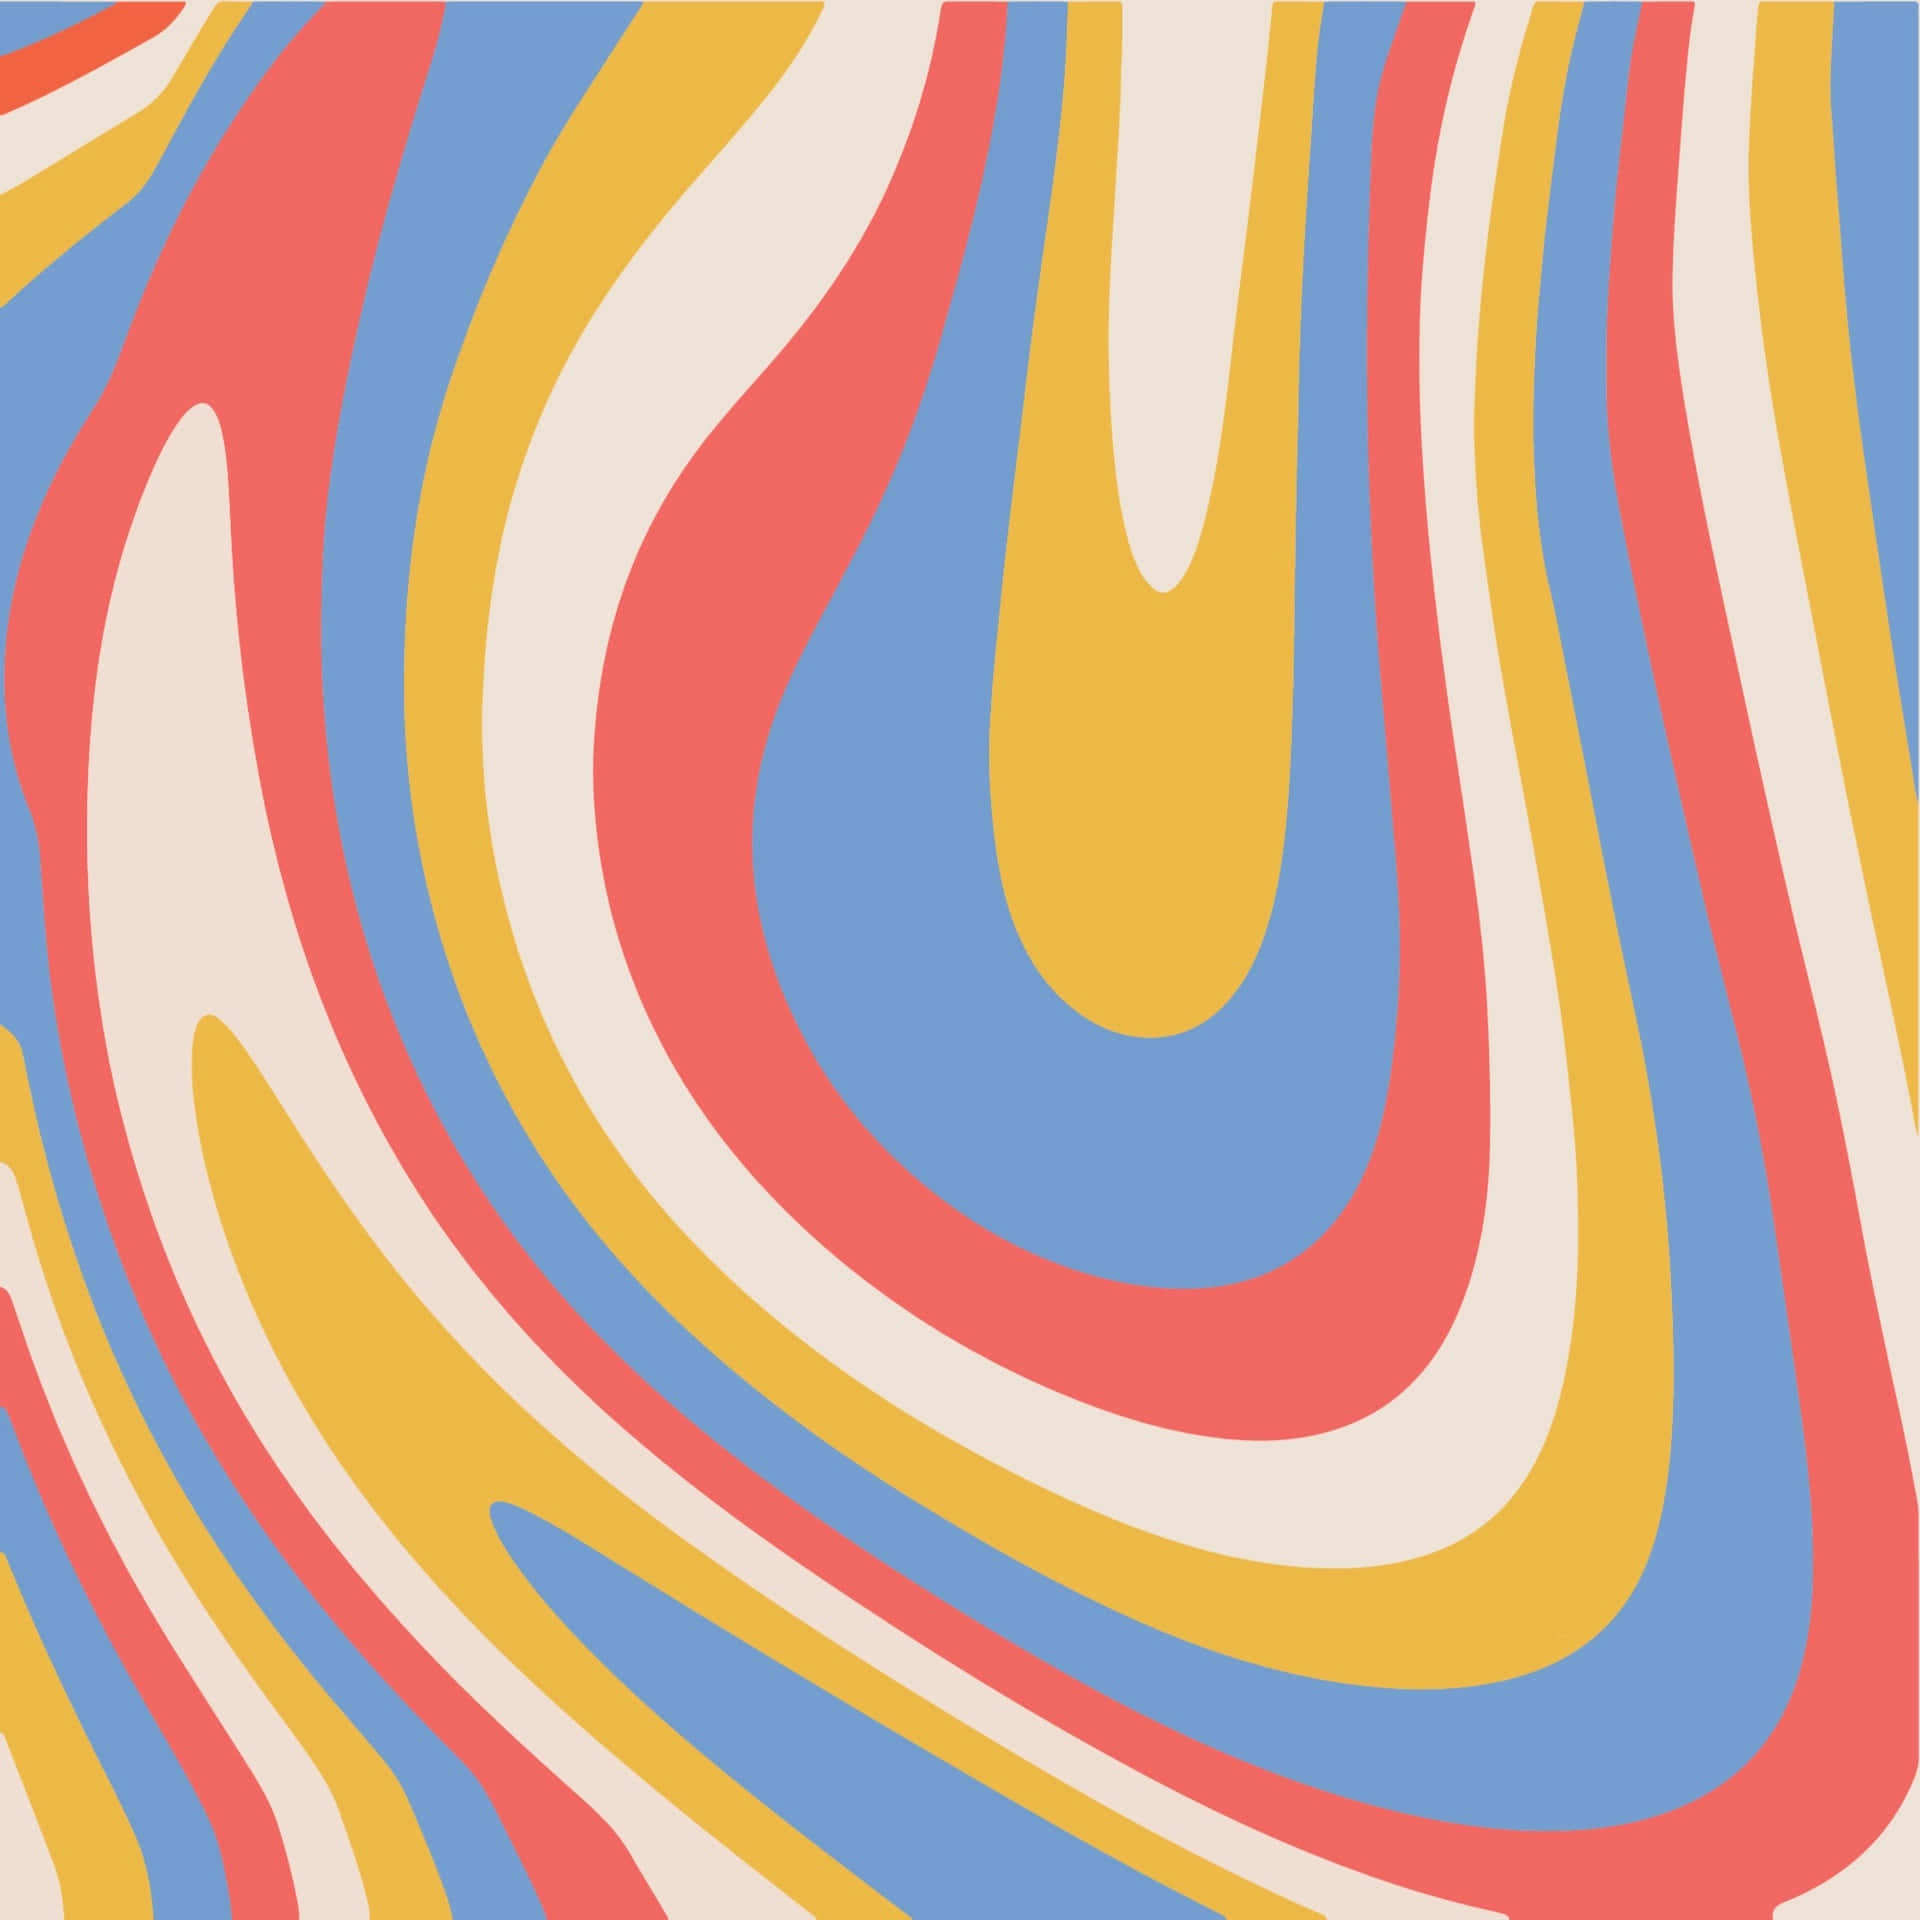 A Colorful Abstract Swirl Pattern